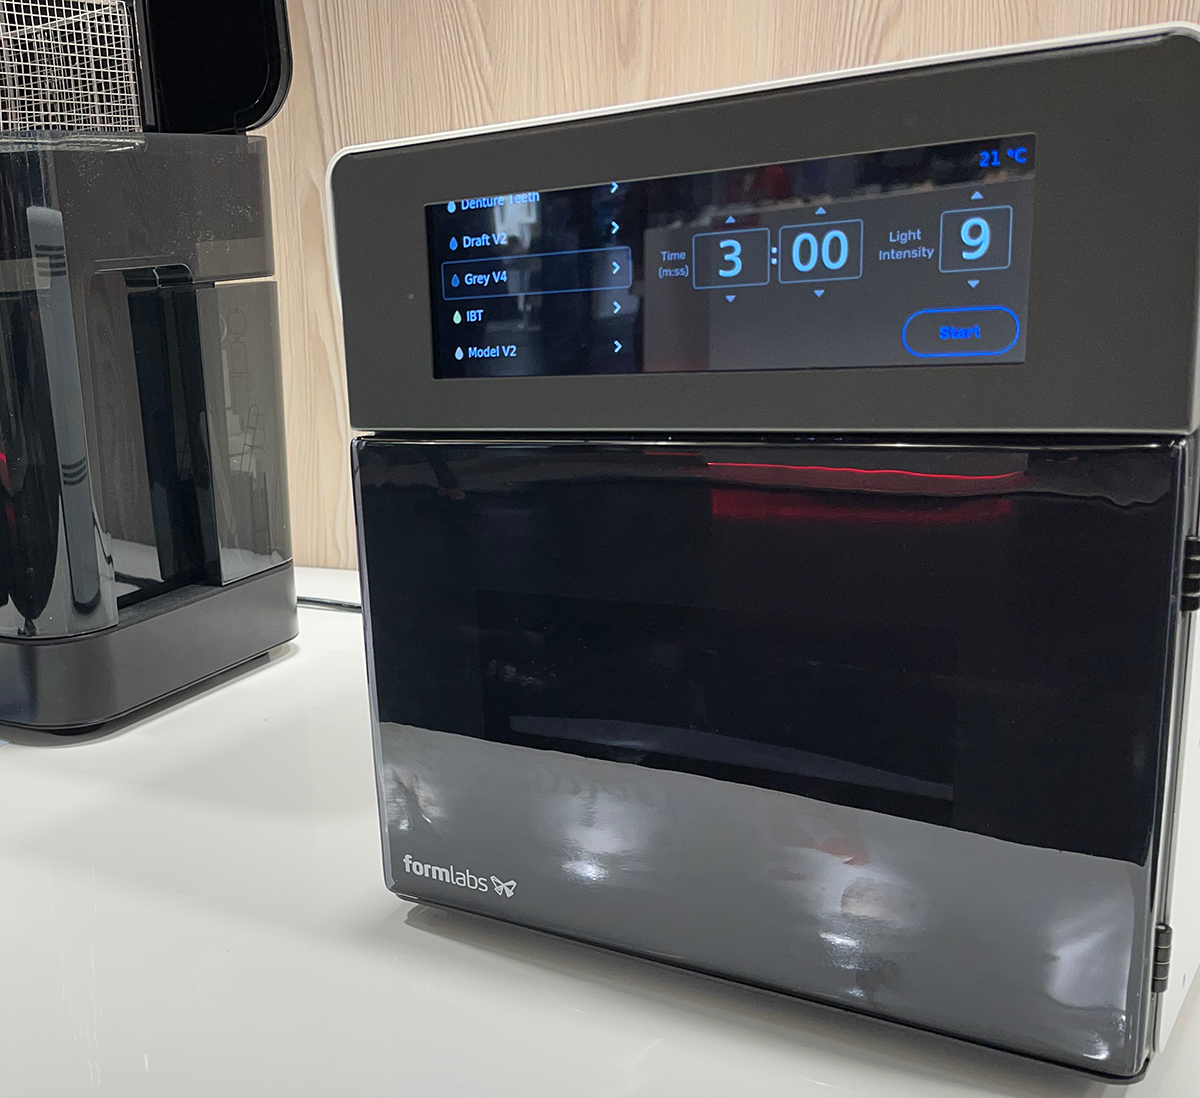 FastCure from formlabs cures printed parts in as little as one minute